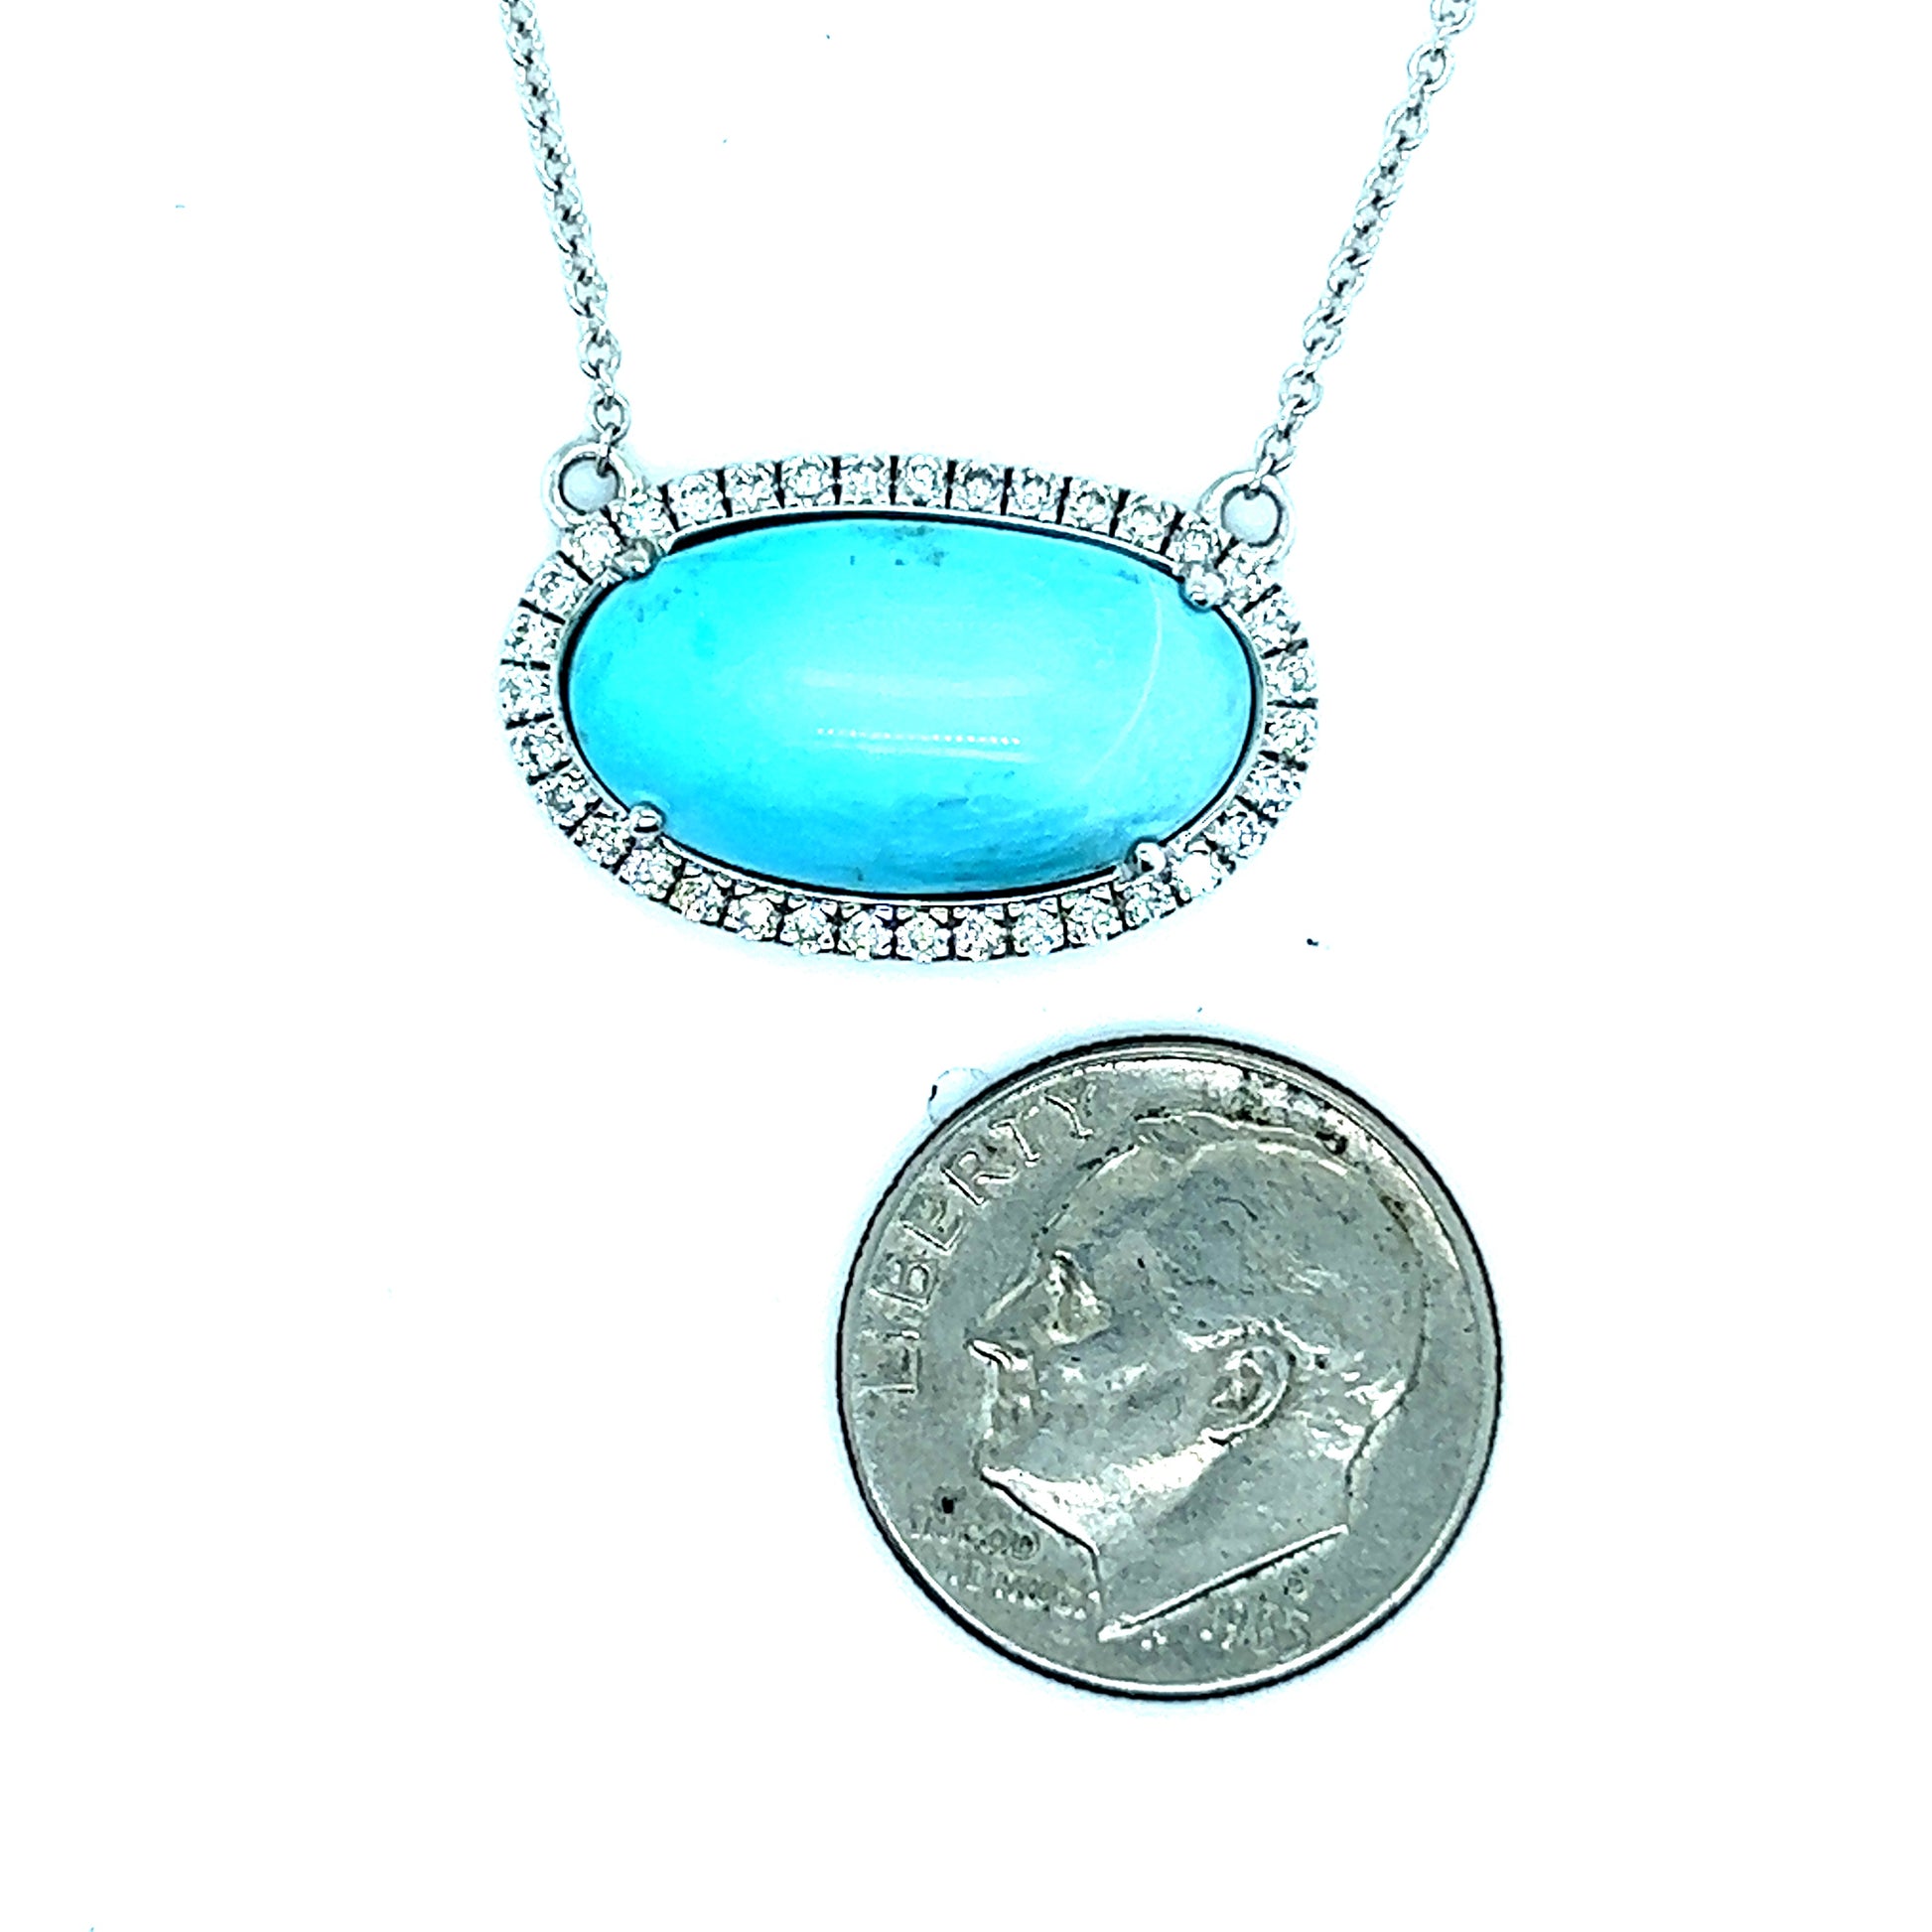 Natural Persian Turquoise Diamond Halo Pendant With Chain 18.5" 14k WG 8.1 TCW Certified $4,975 300679